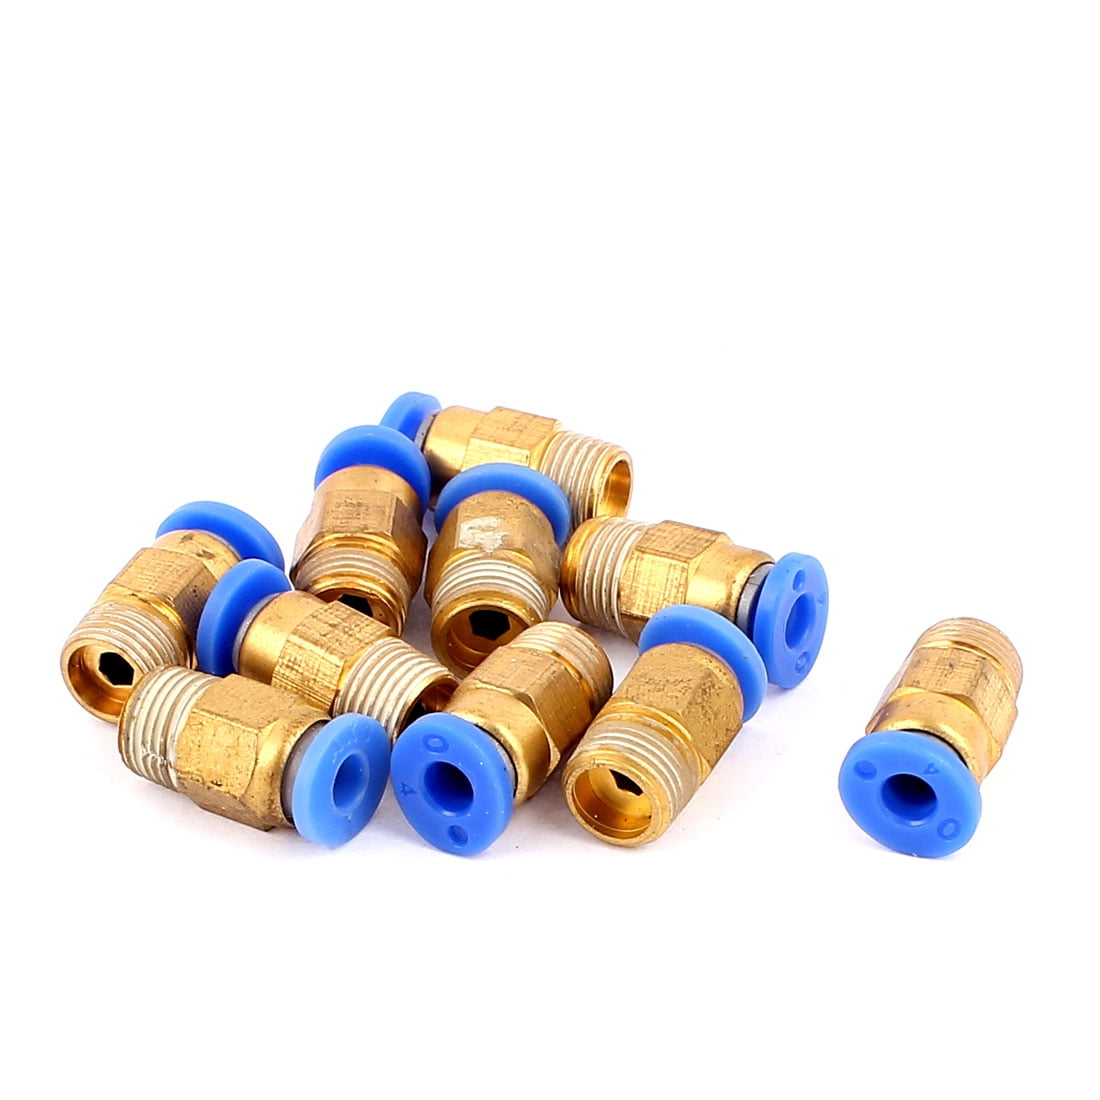 4mm OD 5/32" Push In Y Air Fitting Union Pneumatic Splitter USA Seller 5 Pcs 